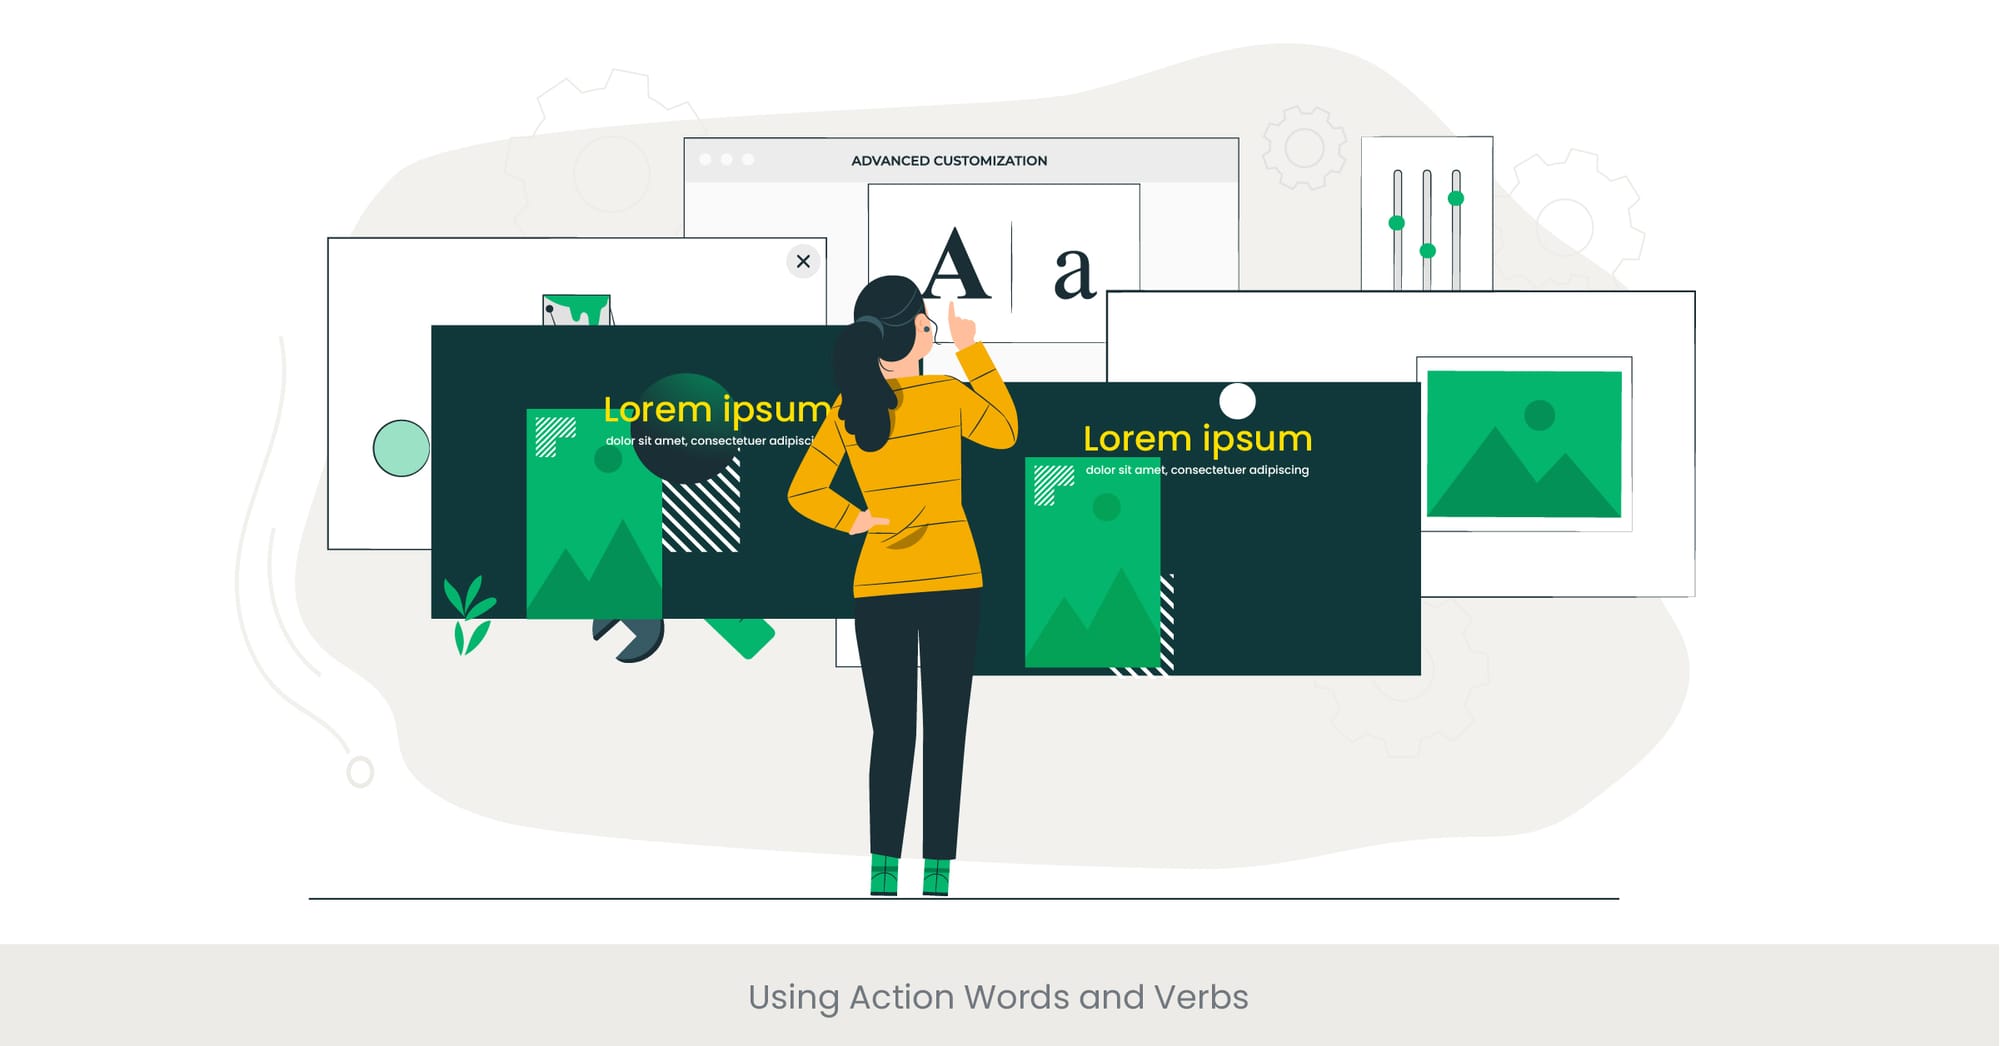 Using Action Words and Verbs